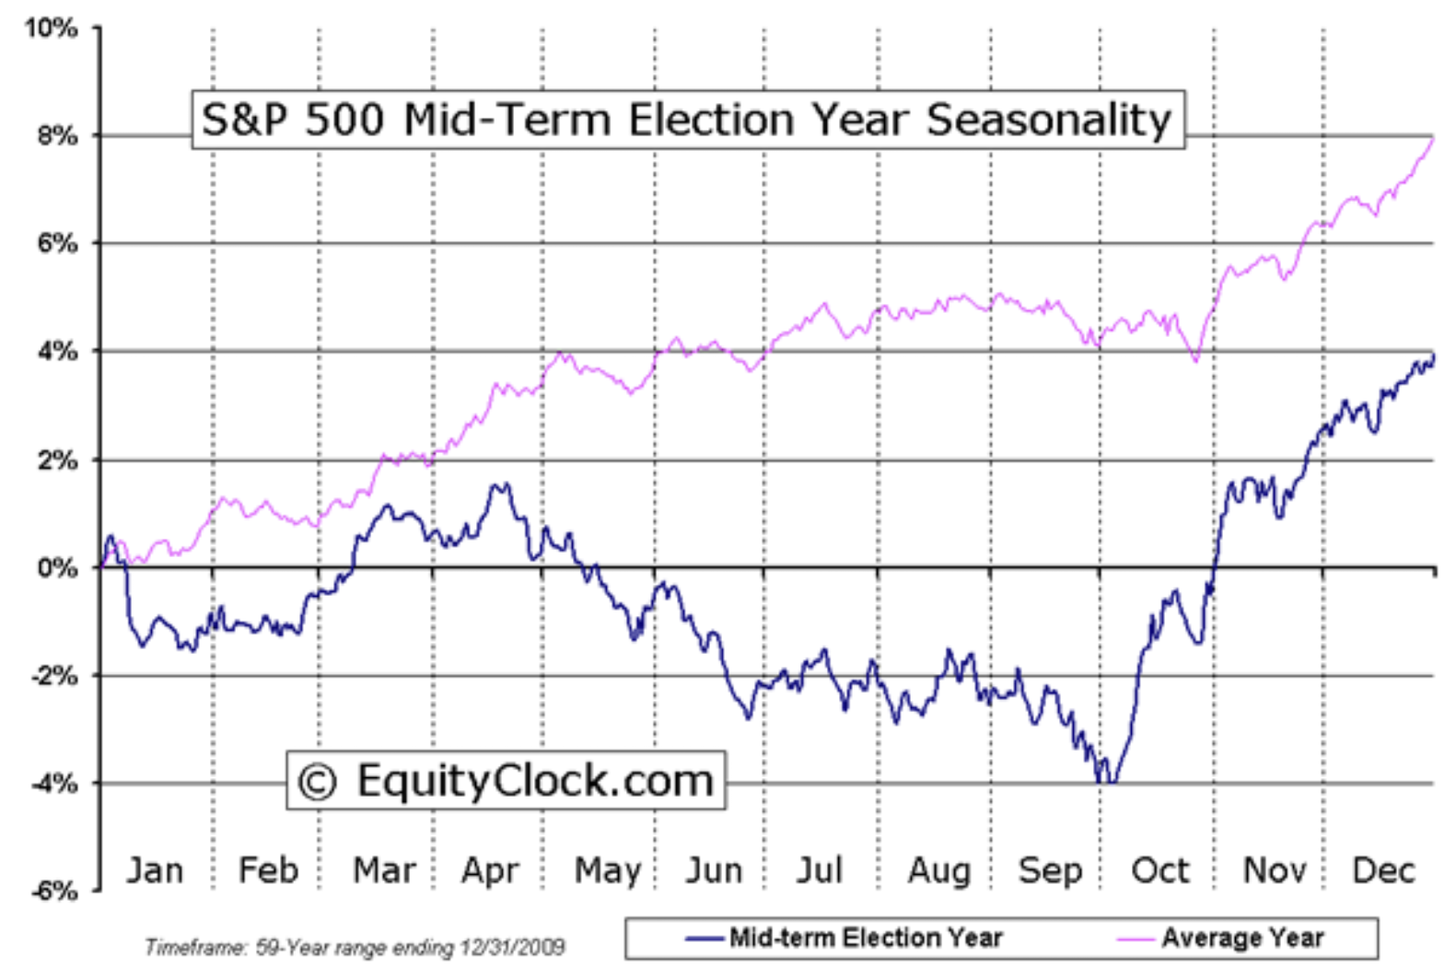 S&P 500 Mid-Term Election Year Seasonality Update